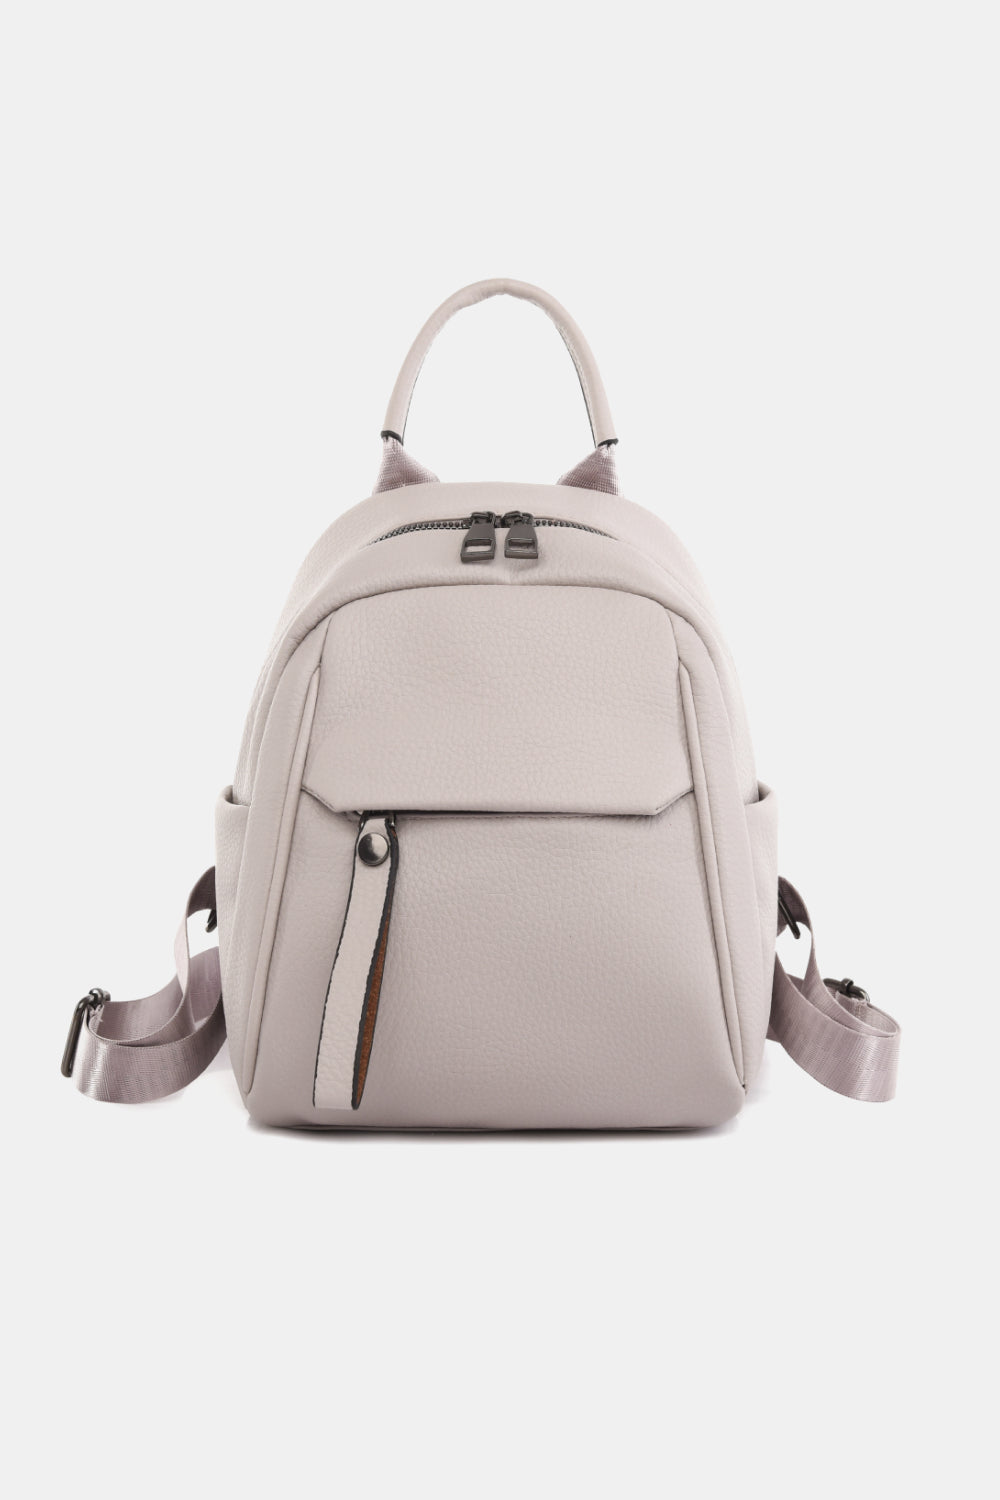 Small PU Leather Backpack - Handbag - FITGGINS